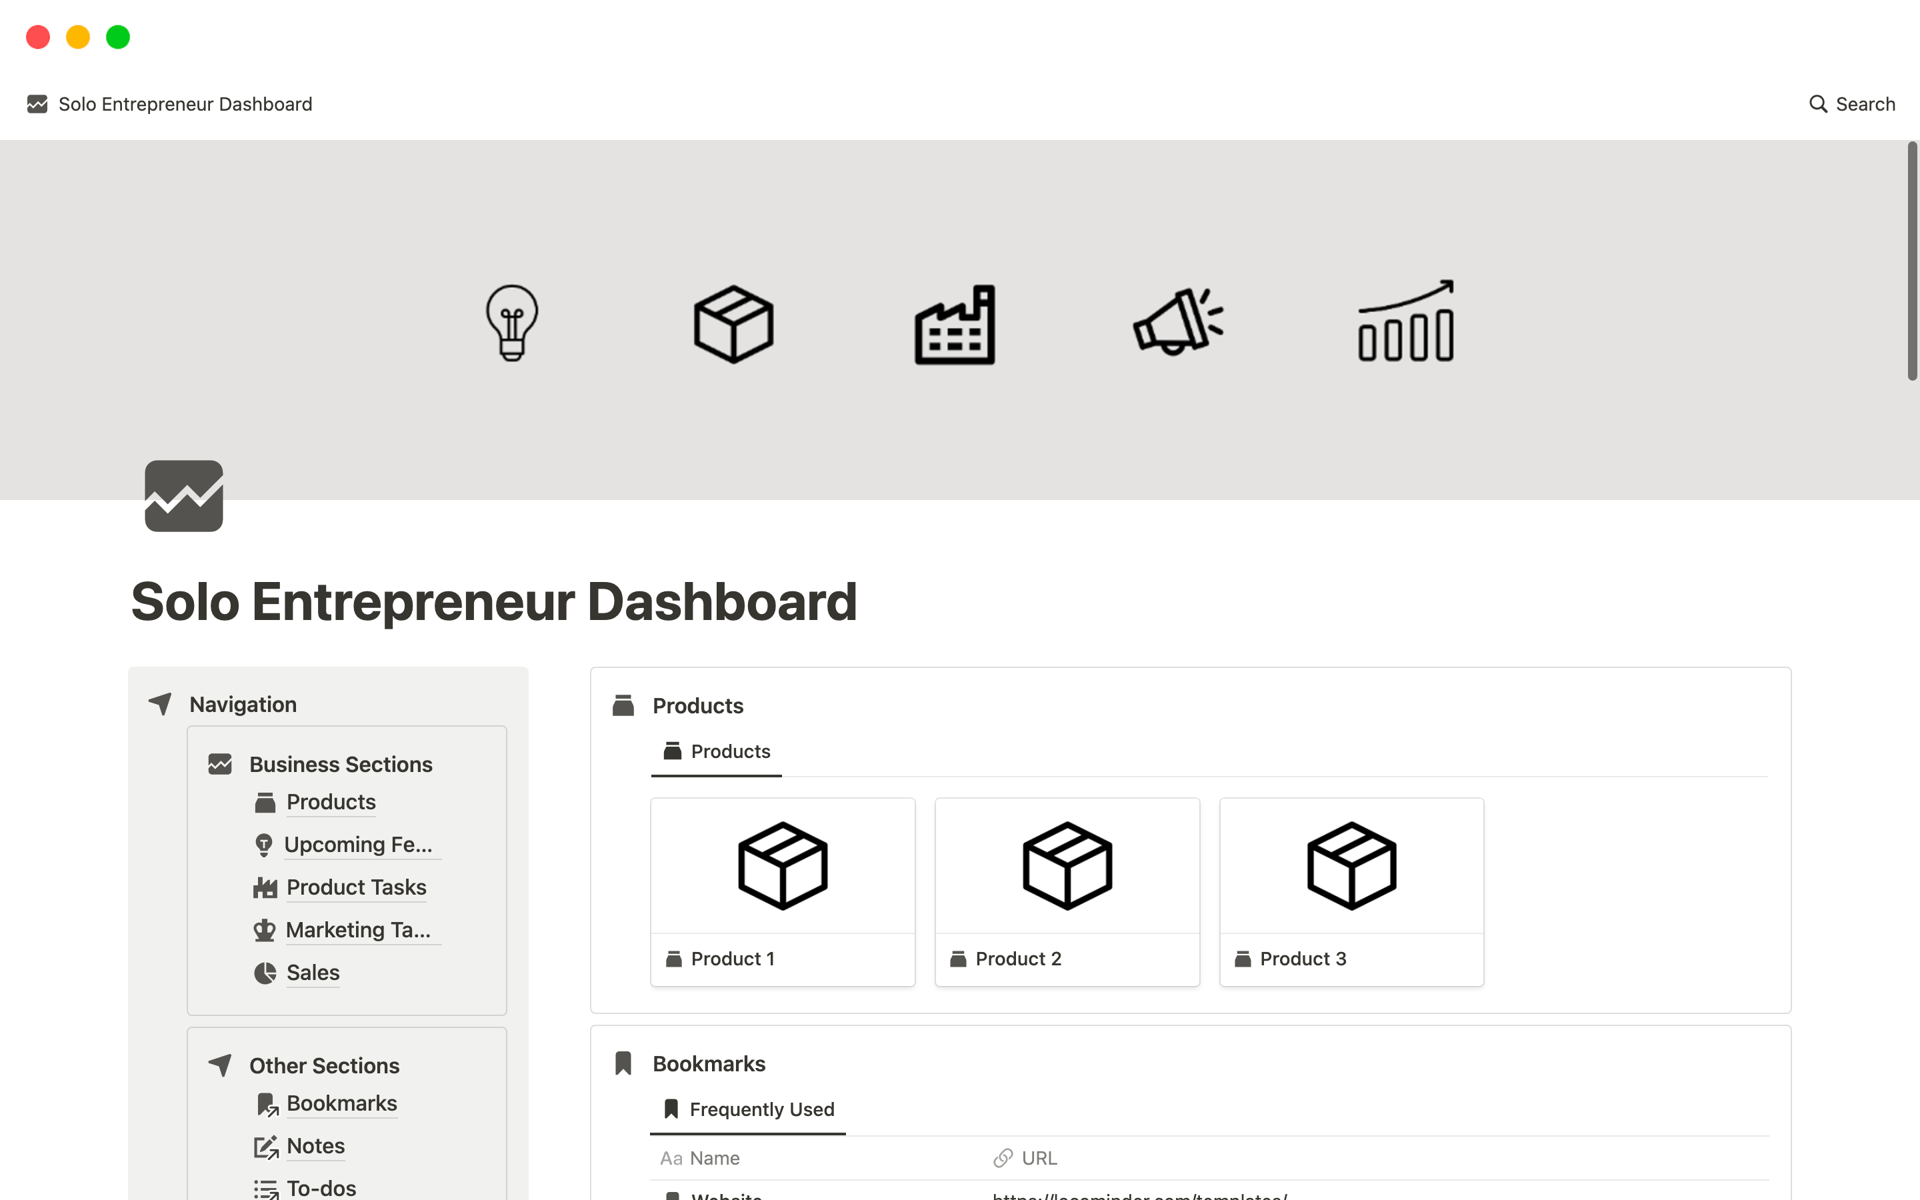 All-in-one dashboard for Solo Entrepreneurs to manage their business